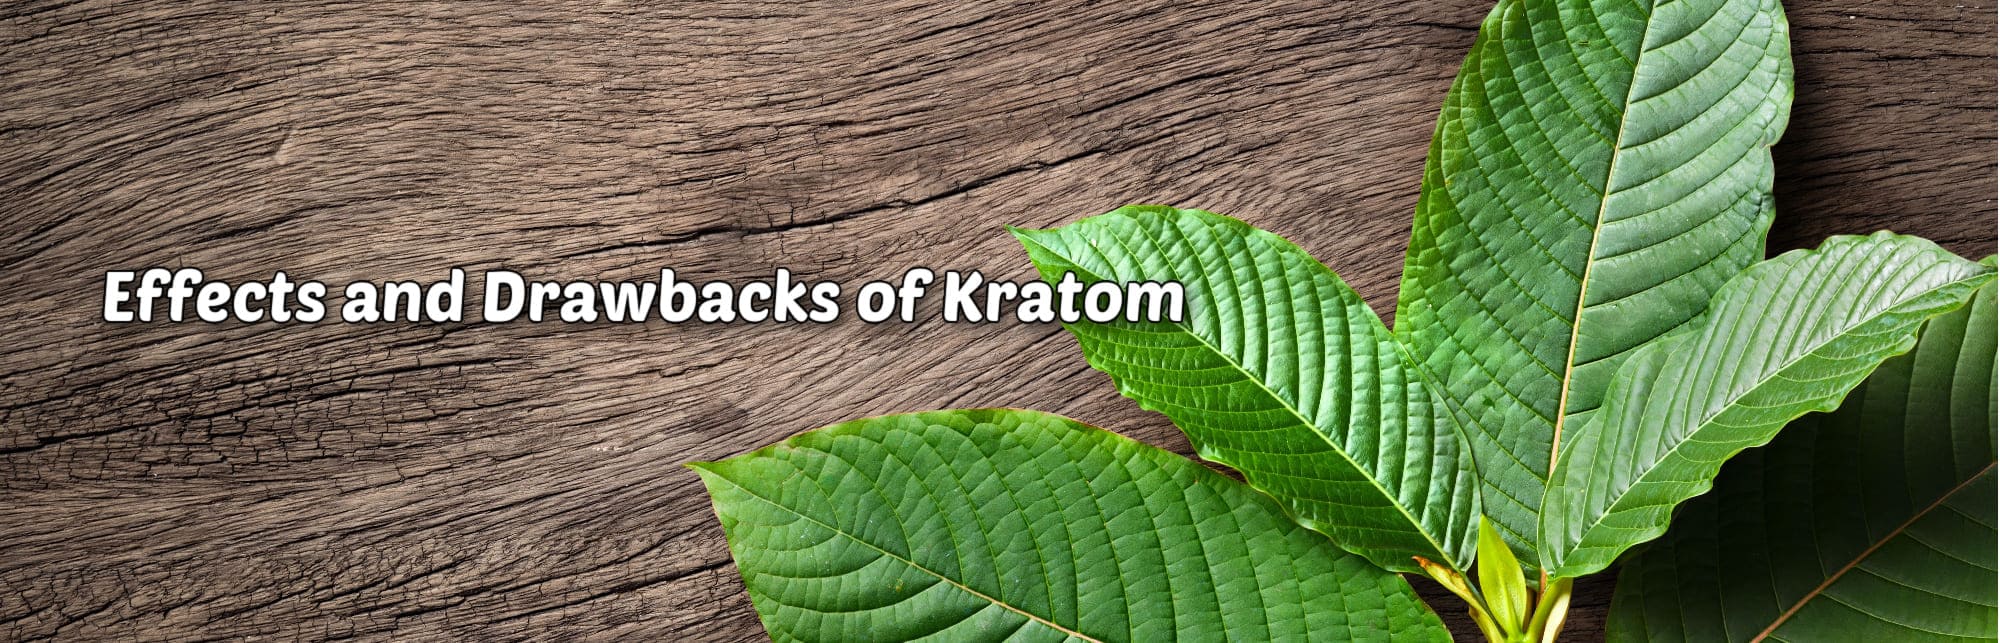 image of effects and drawbacks of kratom